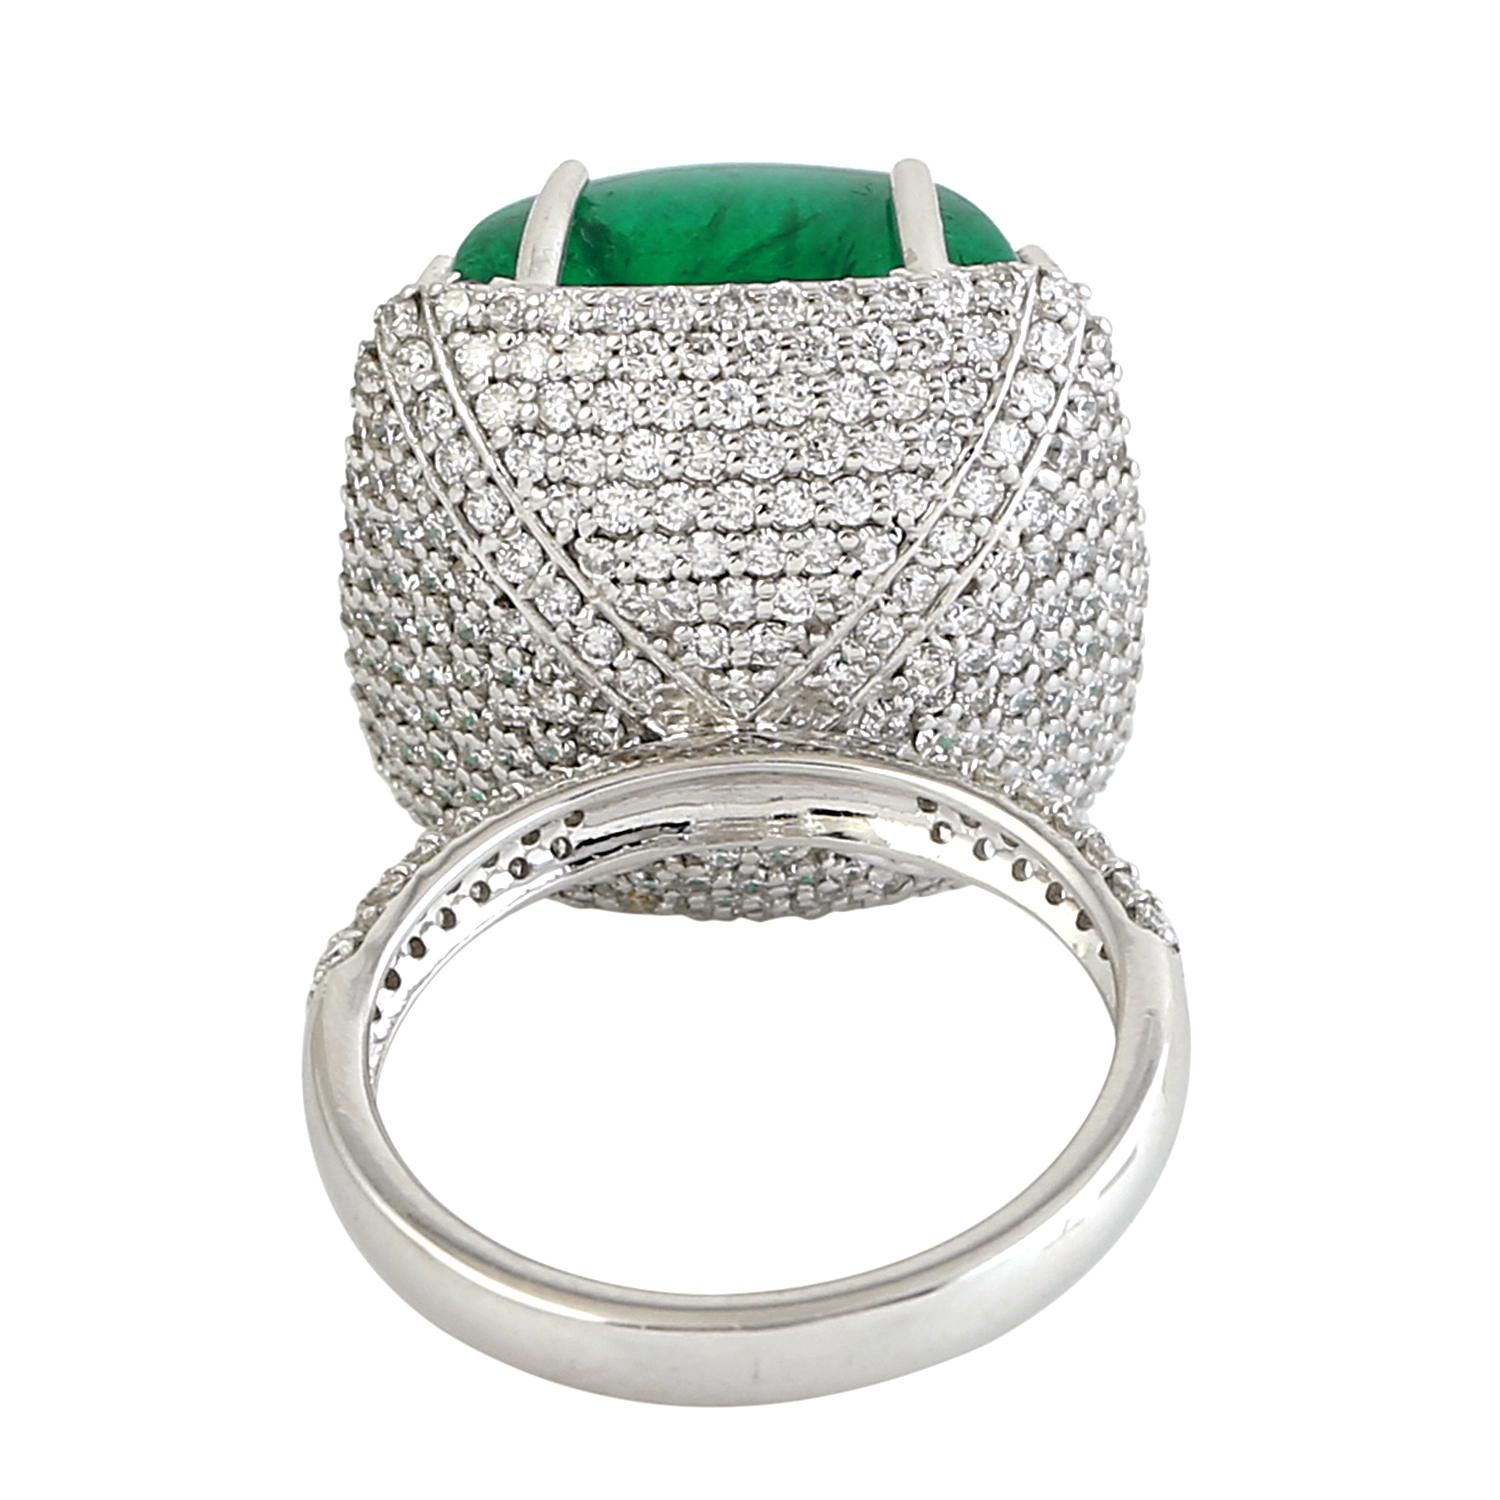 Mixed Cut 24.61ct Emerald Cocktail Ring With Diamonds Made In 18k White Gold For Sale